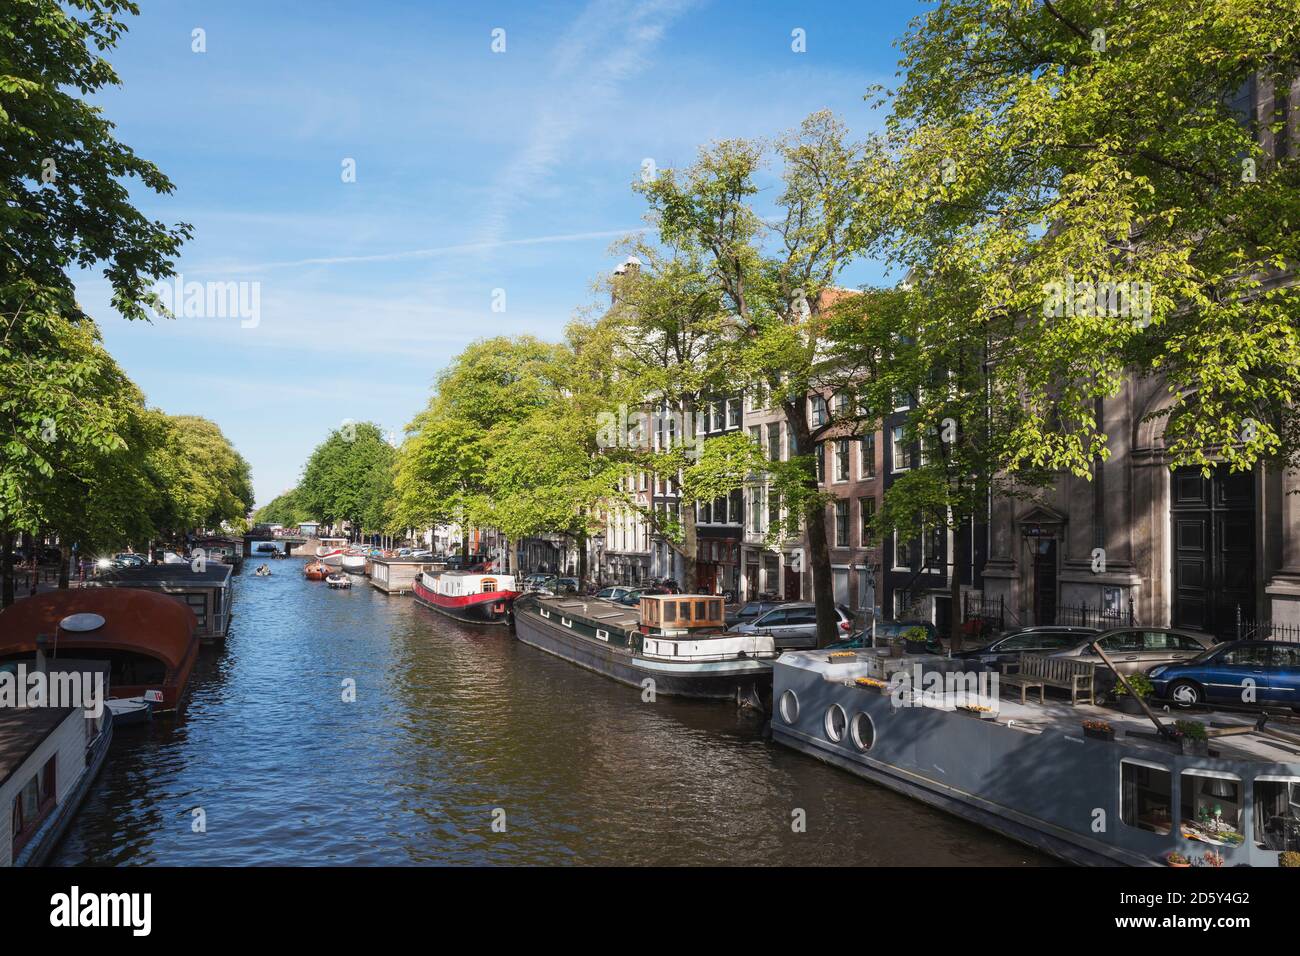 Netherlands, County of Holland, Amsterdam, town canal with house boats Stock Photo